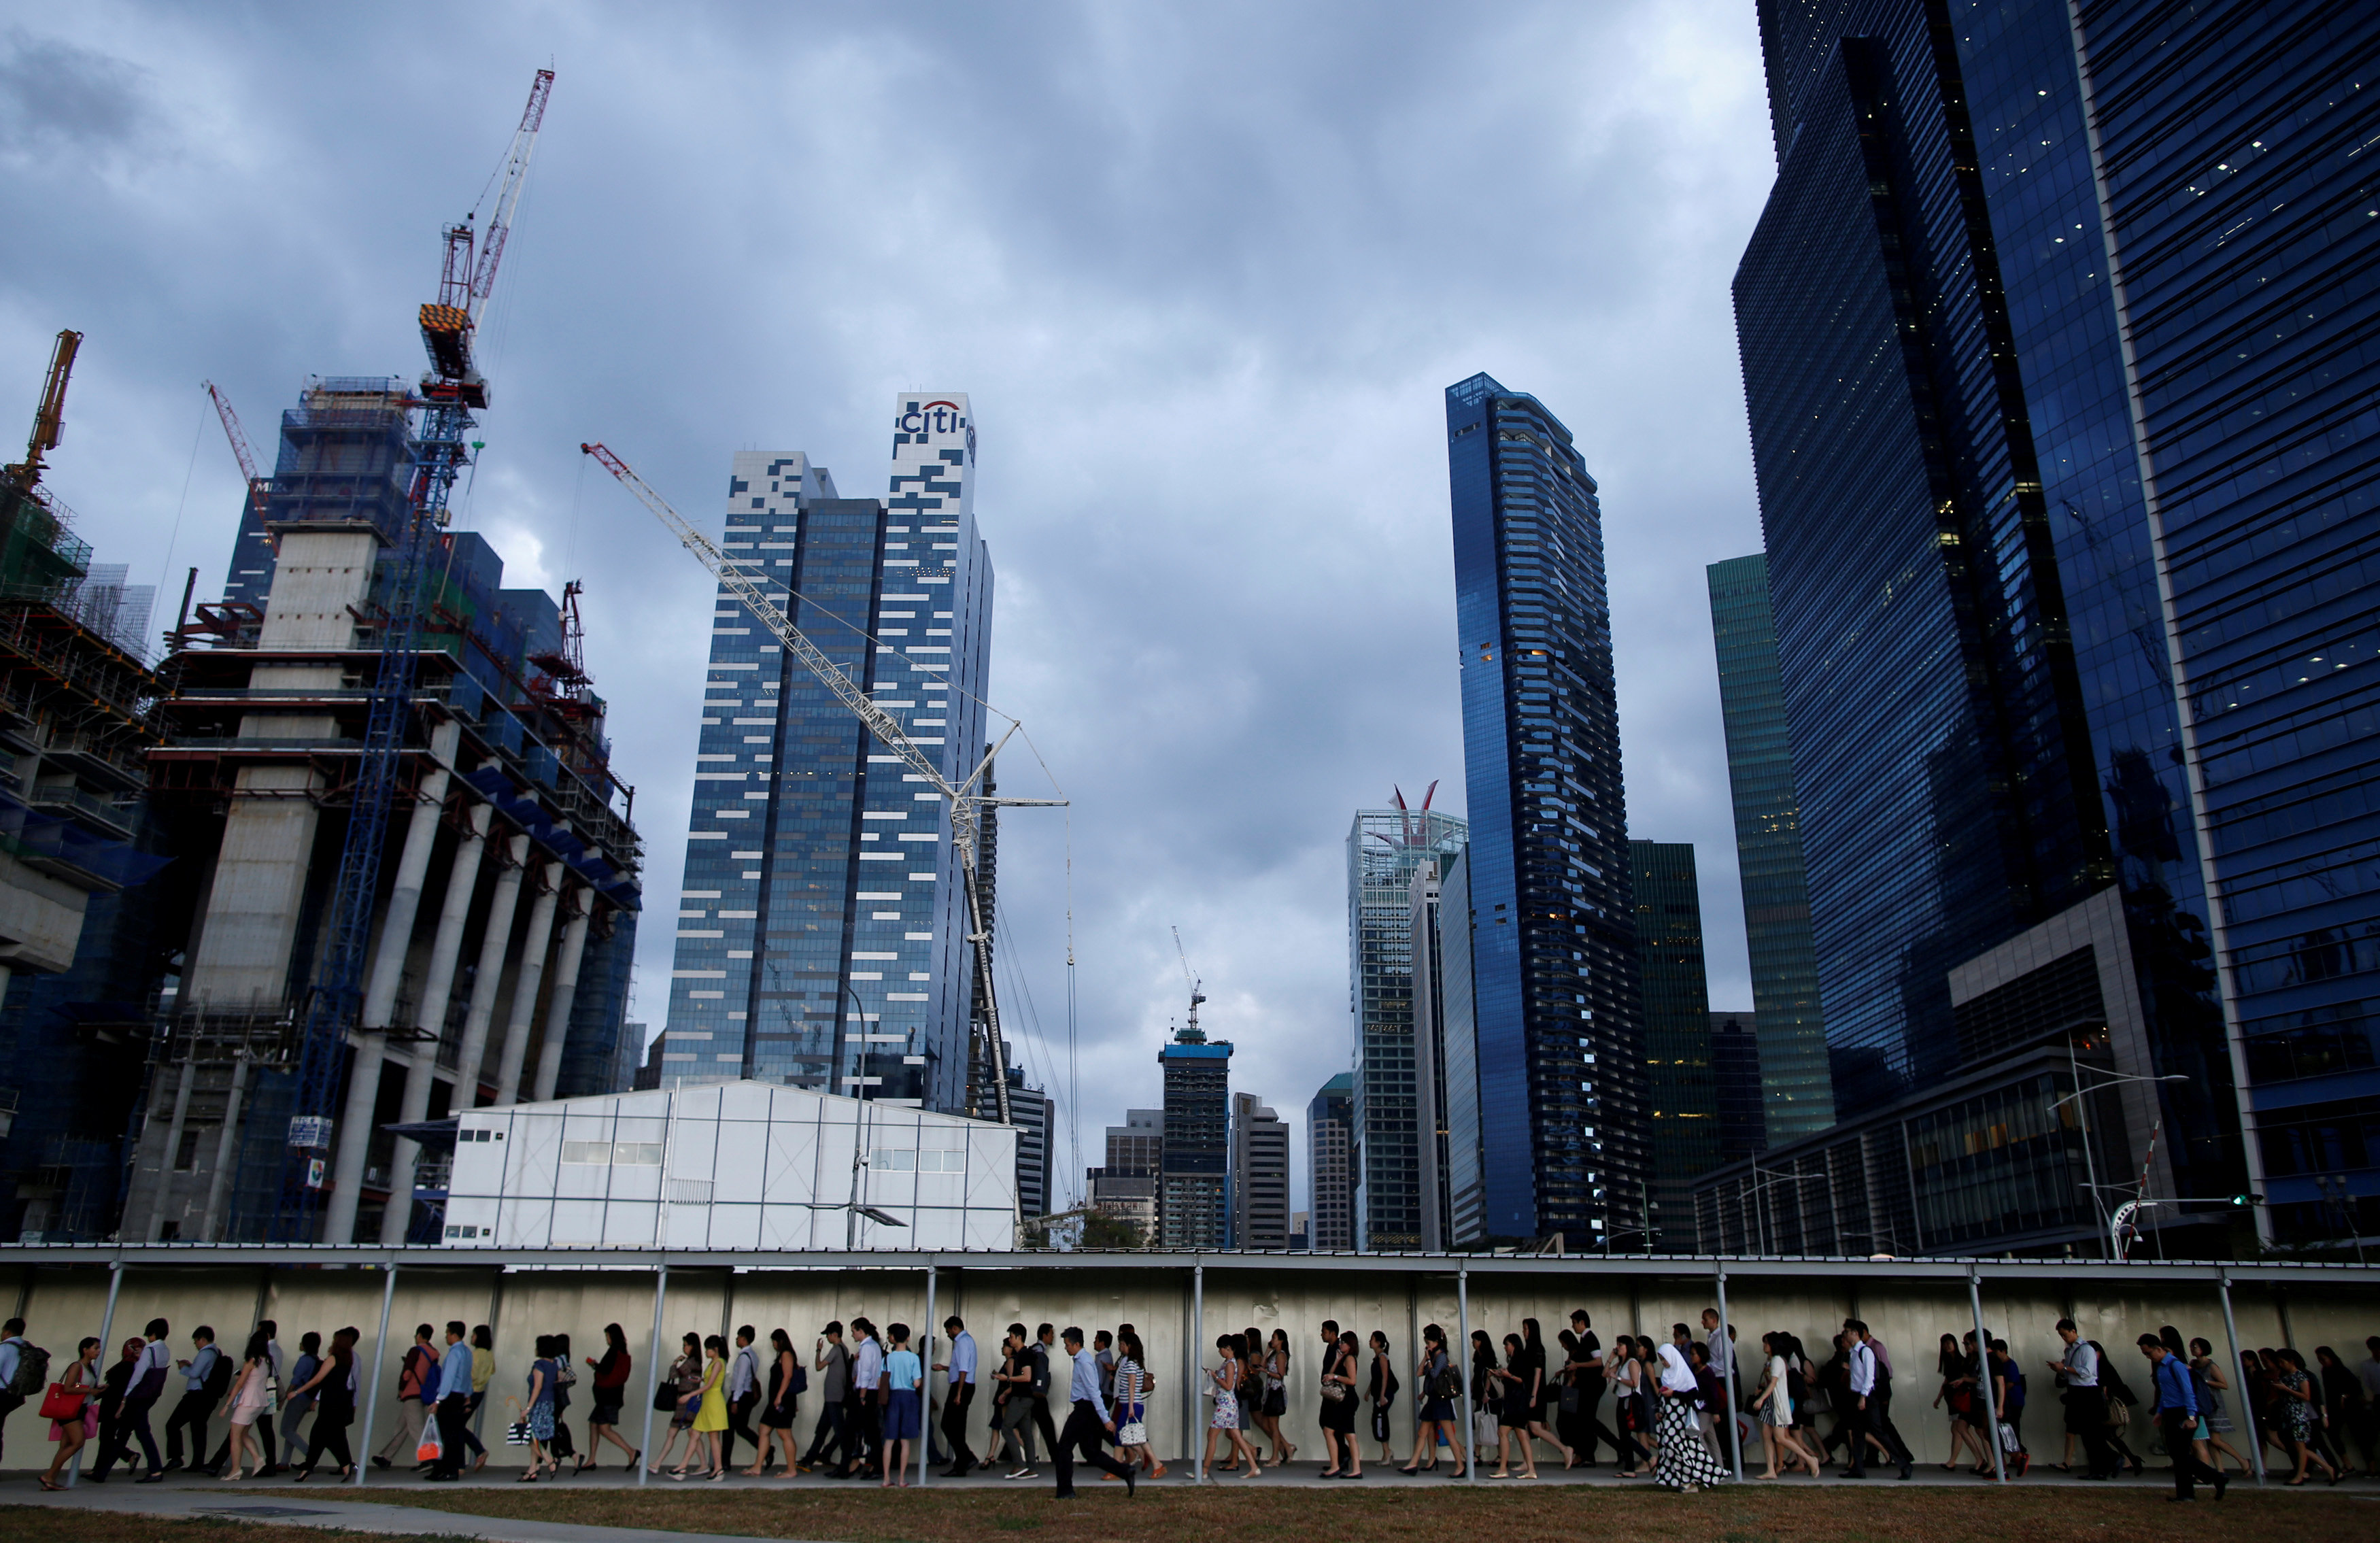 Office workers walk to the train station during evening rush hour in the financial district of Singapore March 9, 2015. REUTERS/Edgar Su/File Photo